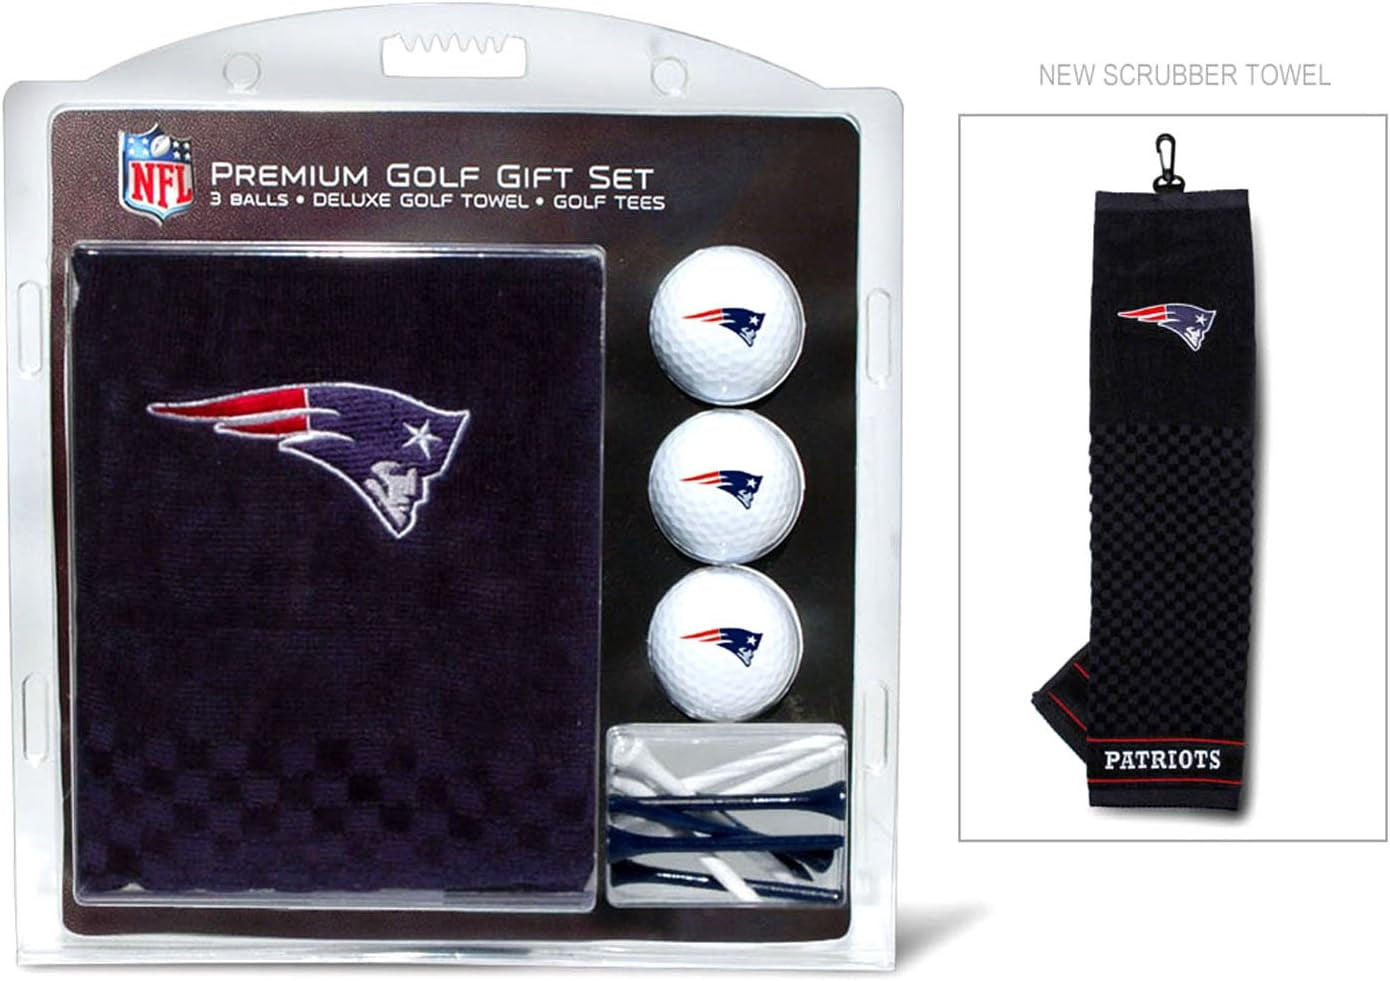 "Score Big with the Ultimate NFL Golf Gift Set: Deluxe Embroidered Towel, Pro-Grade Golf Balls, and Regulation Tees!"